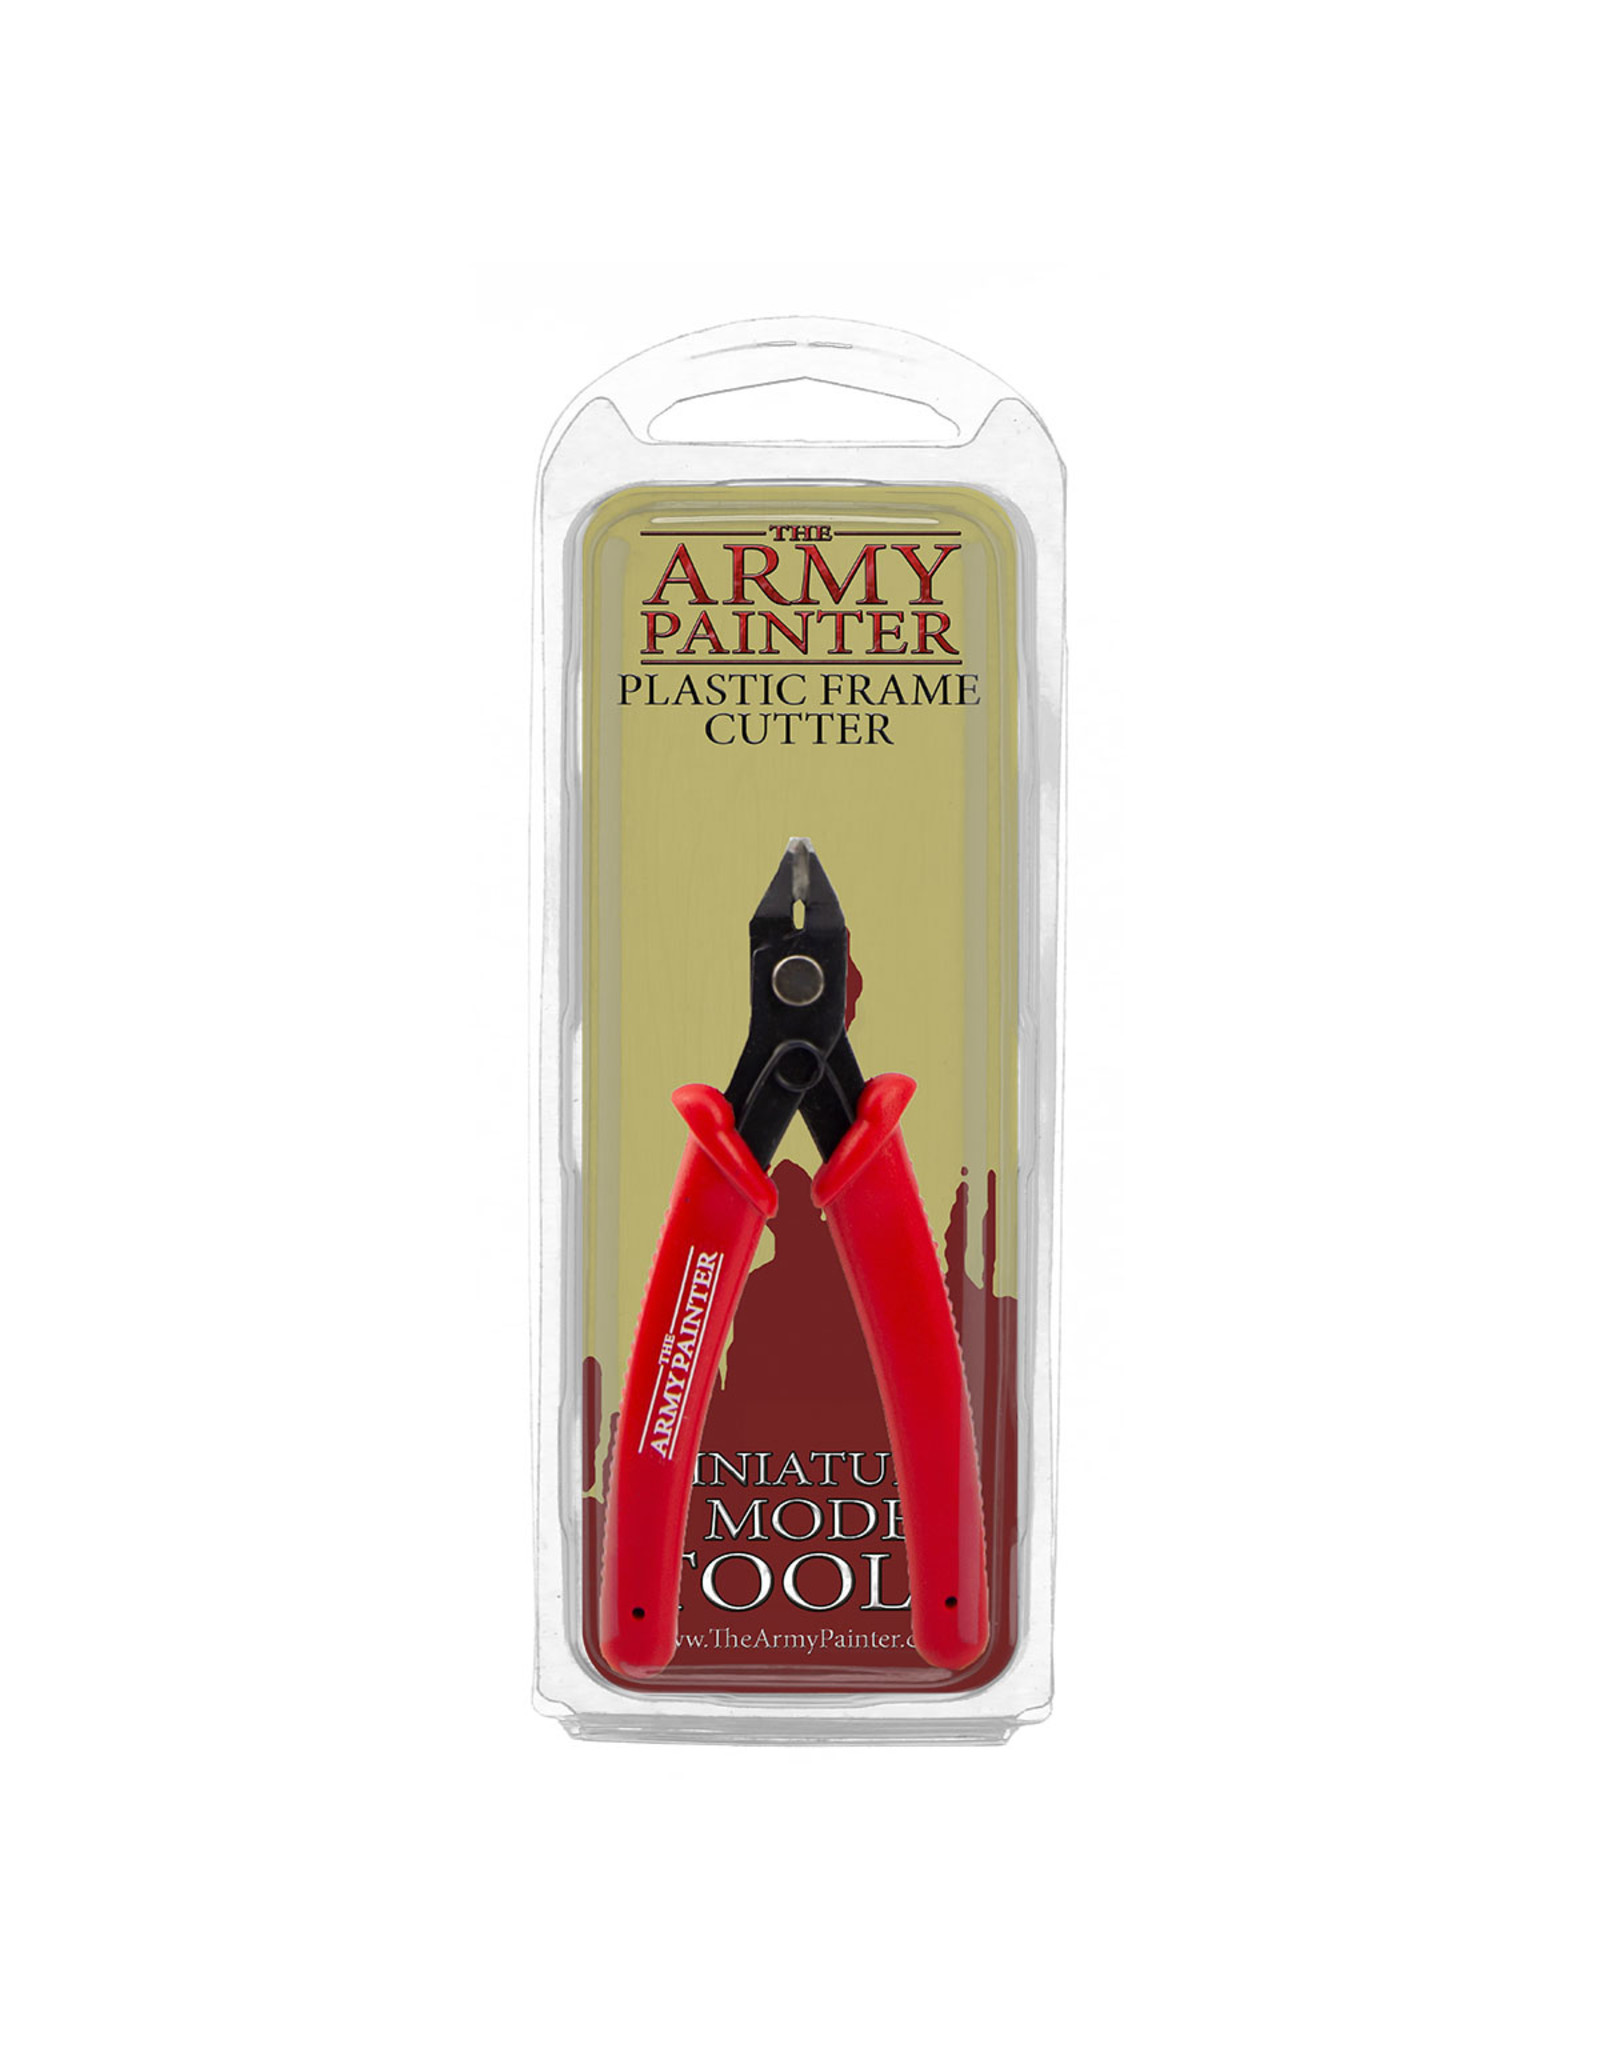 The Army Painter The Army Painter Plastic Frame Cutter